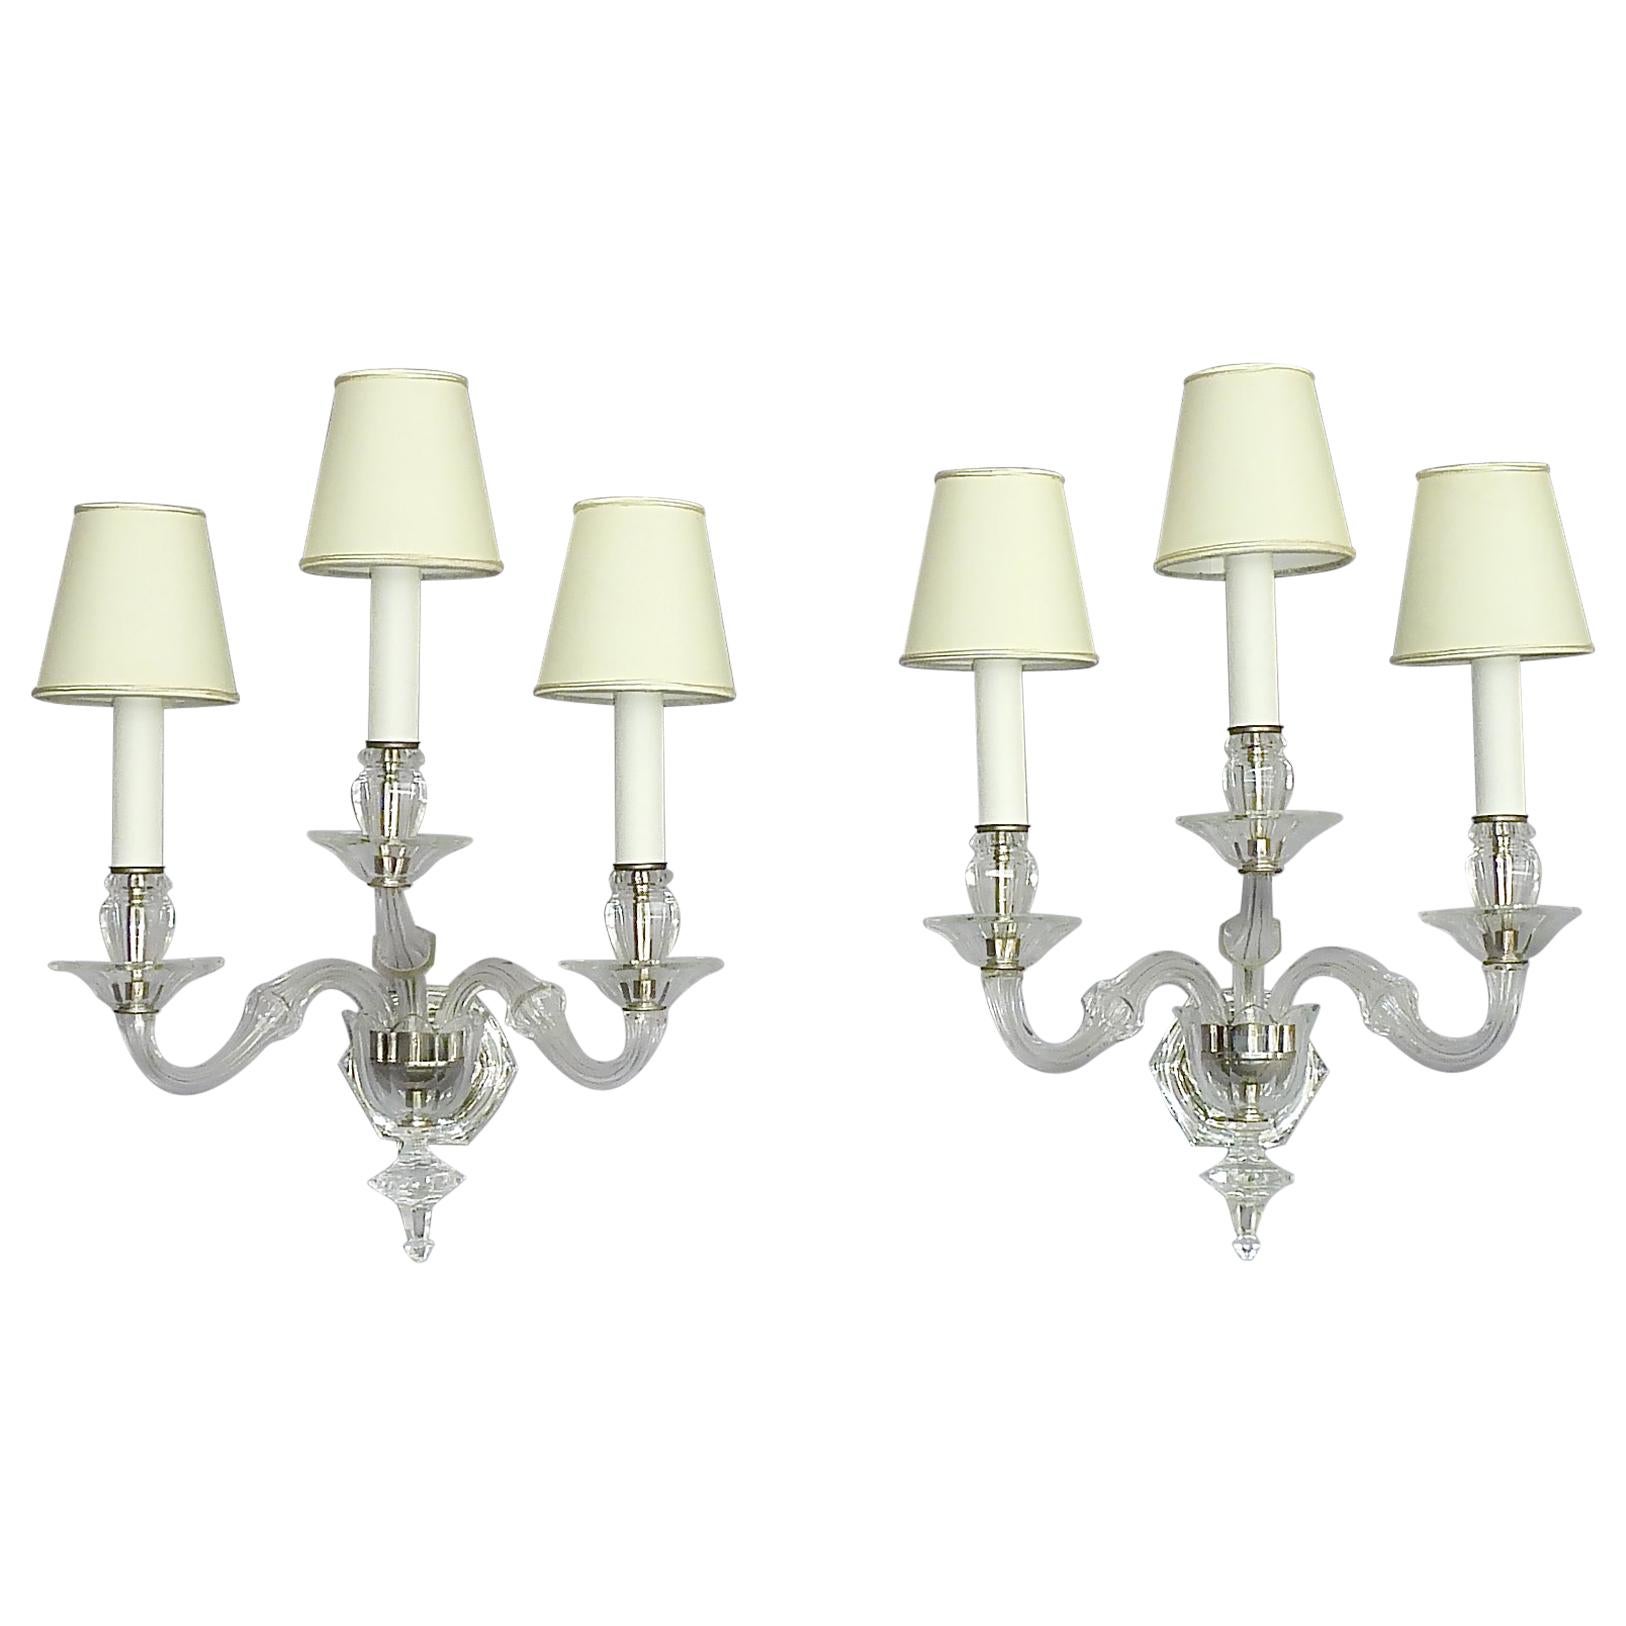 Large Pair of Art Deco Faceted Crystal Glass Wall Lamps Sconces Baccarat Style For Sale